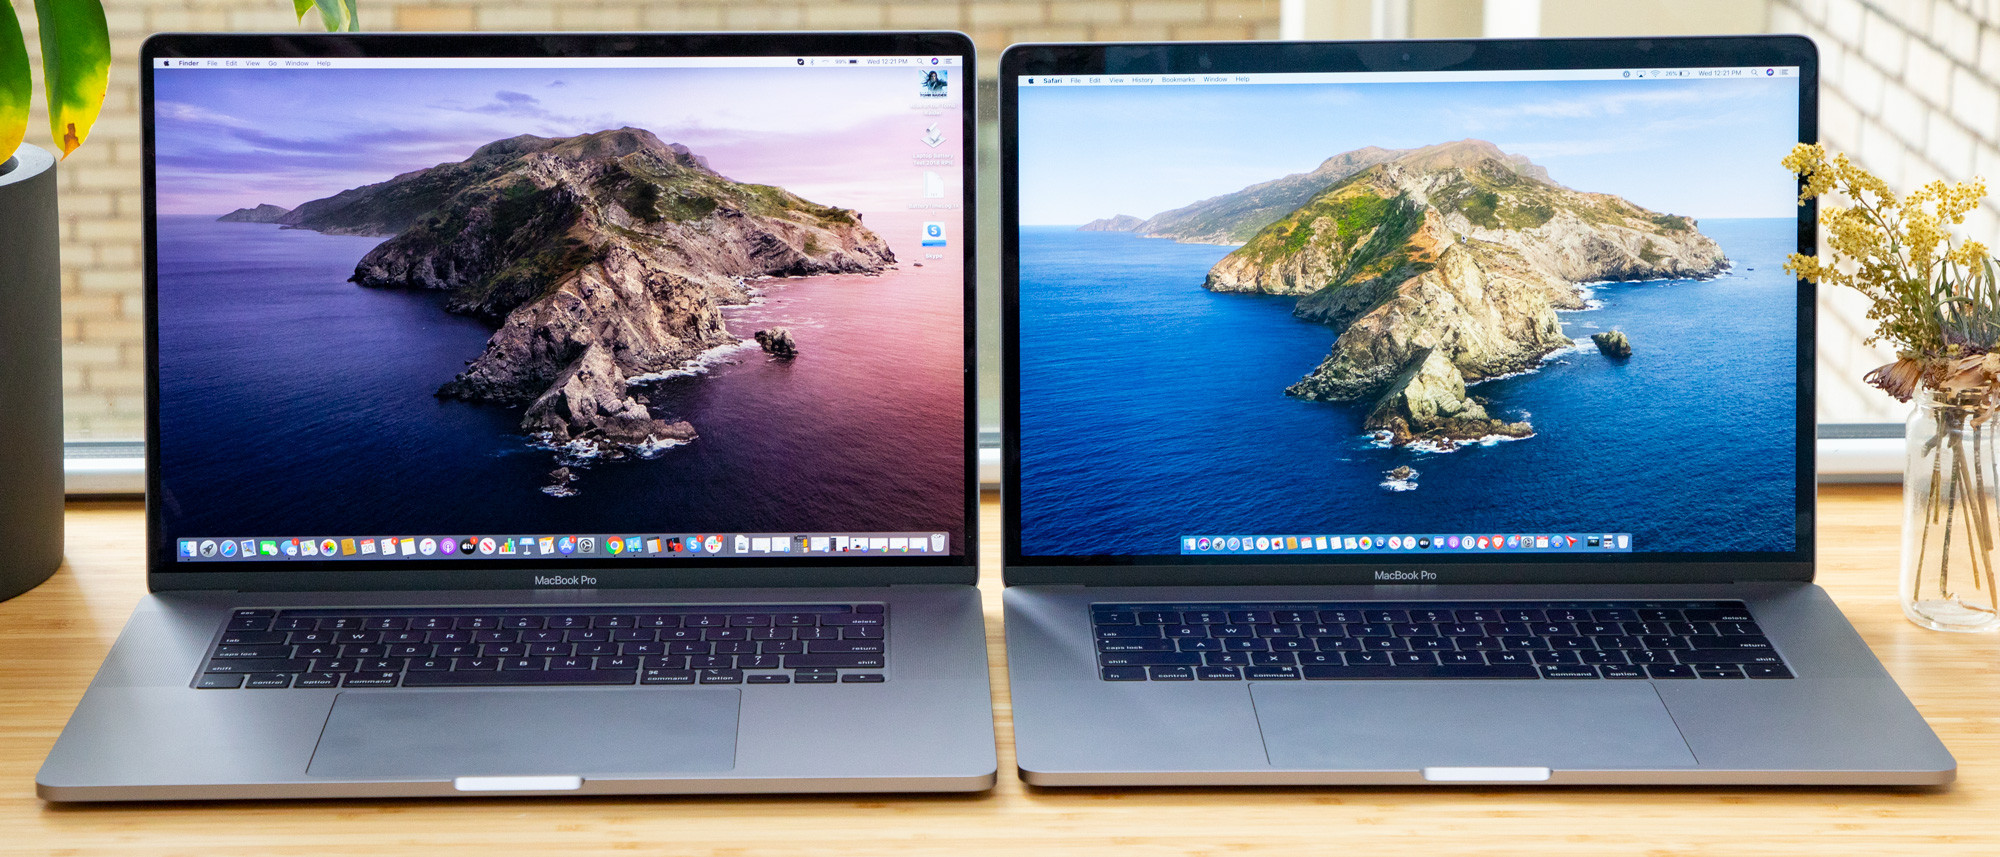 17 inch macbook pro vs 15 inch retina display toy for 10 year old